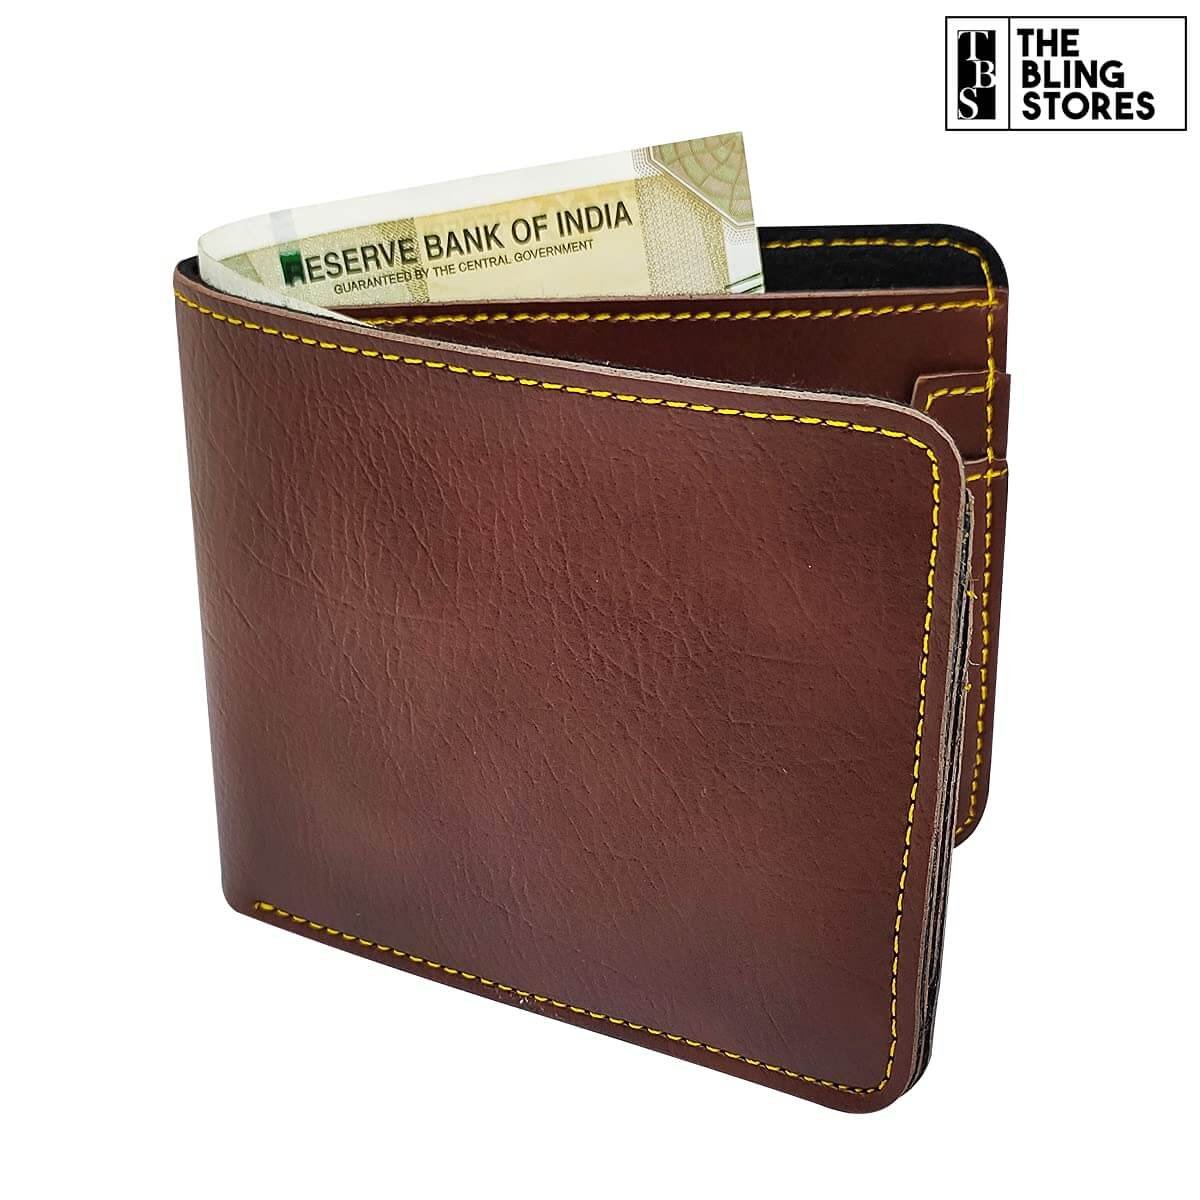 https://shoppingyatra.com/product_images/The Bling Stores Personalized Custom Genuine Leather Wallet for Men with Name and Charm (Tan Brown)2.jpg